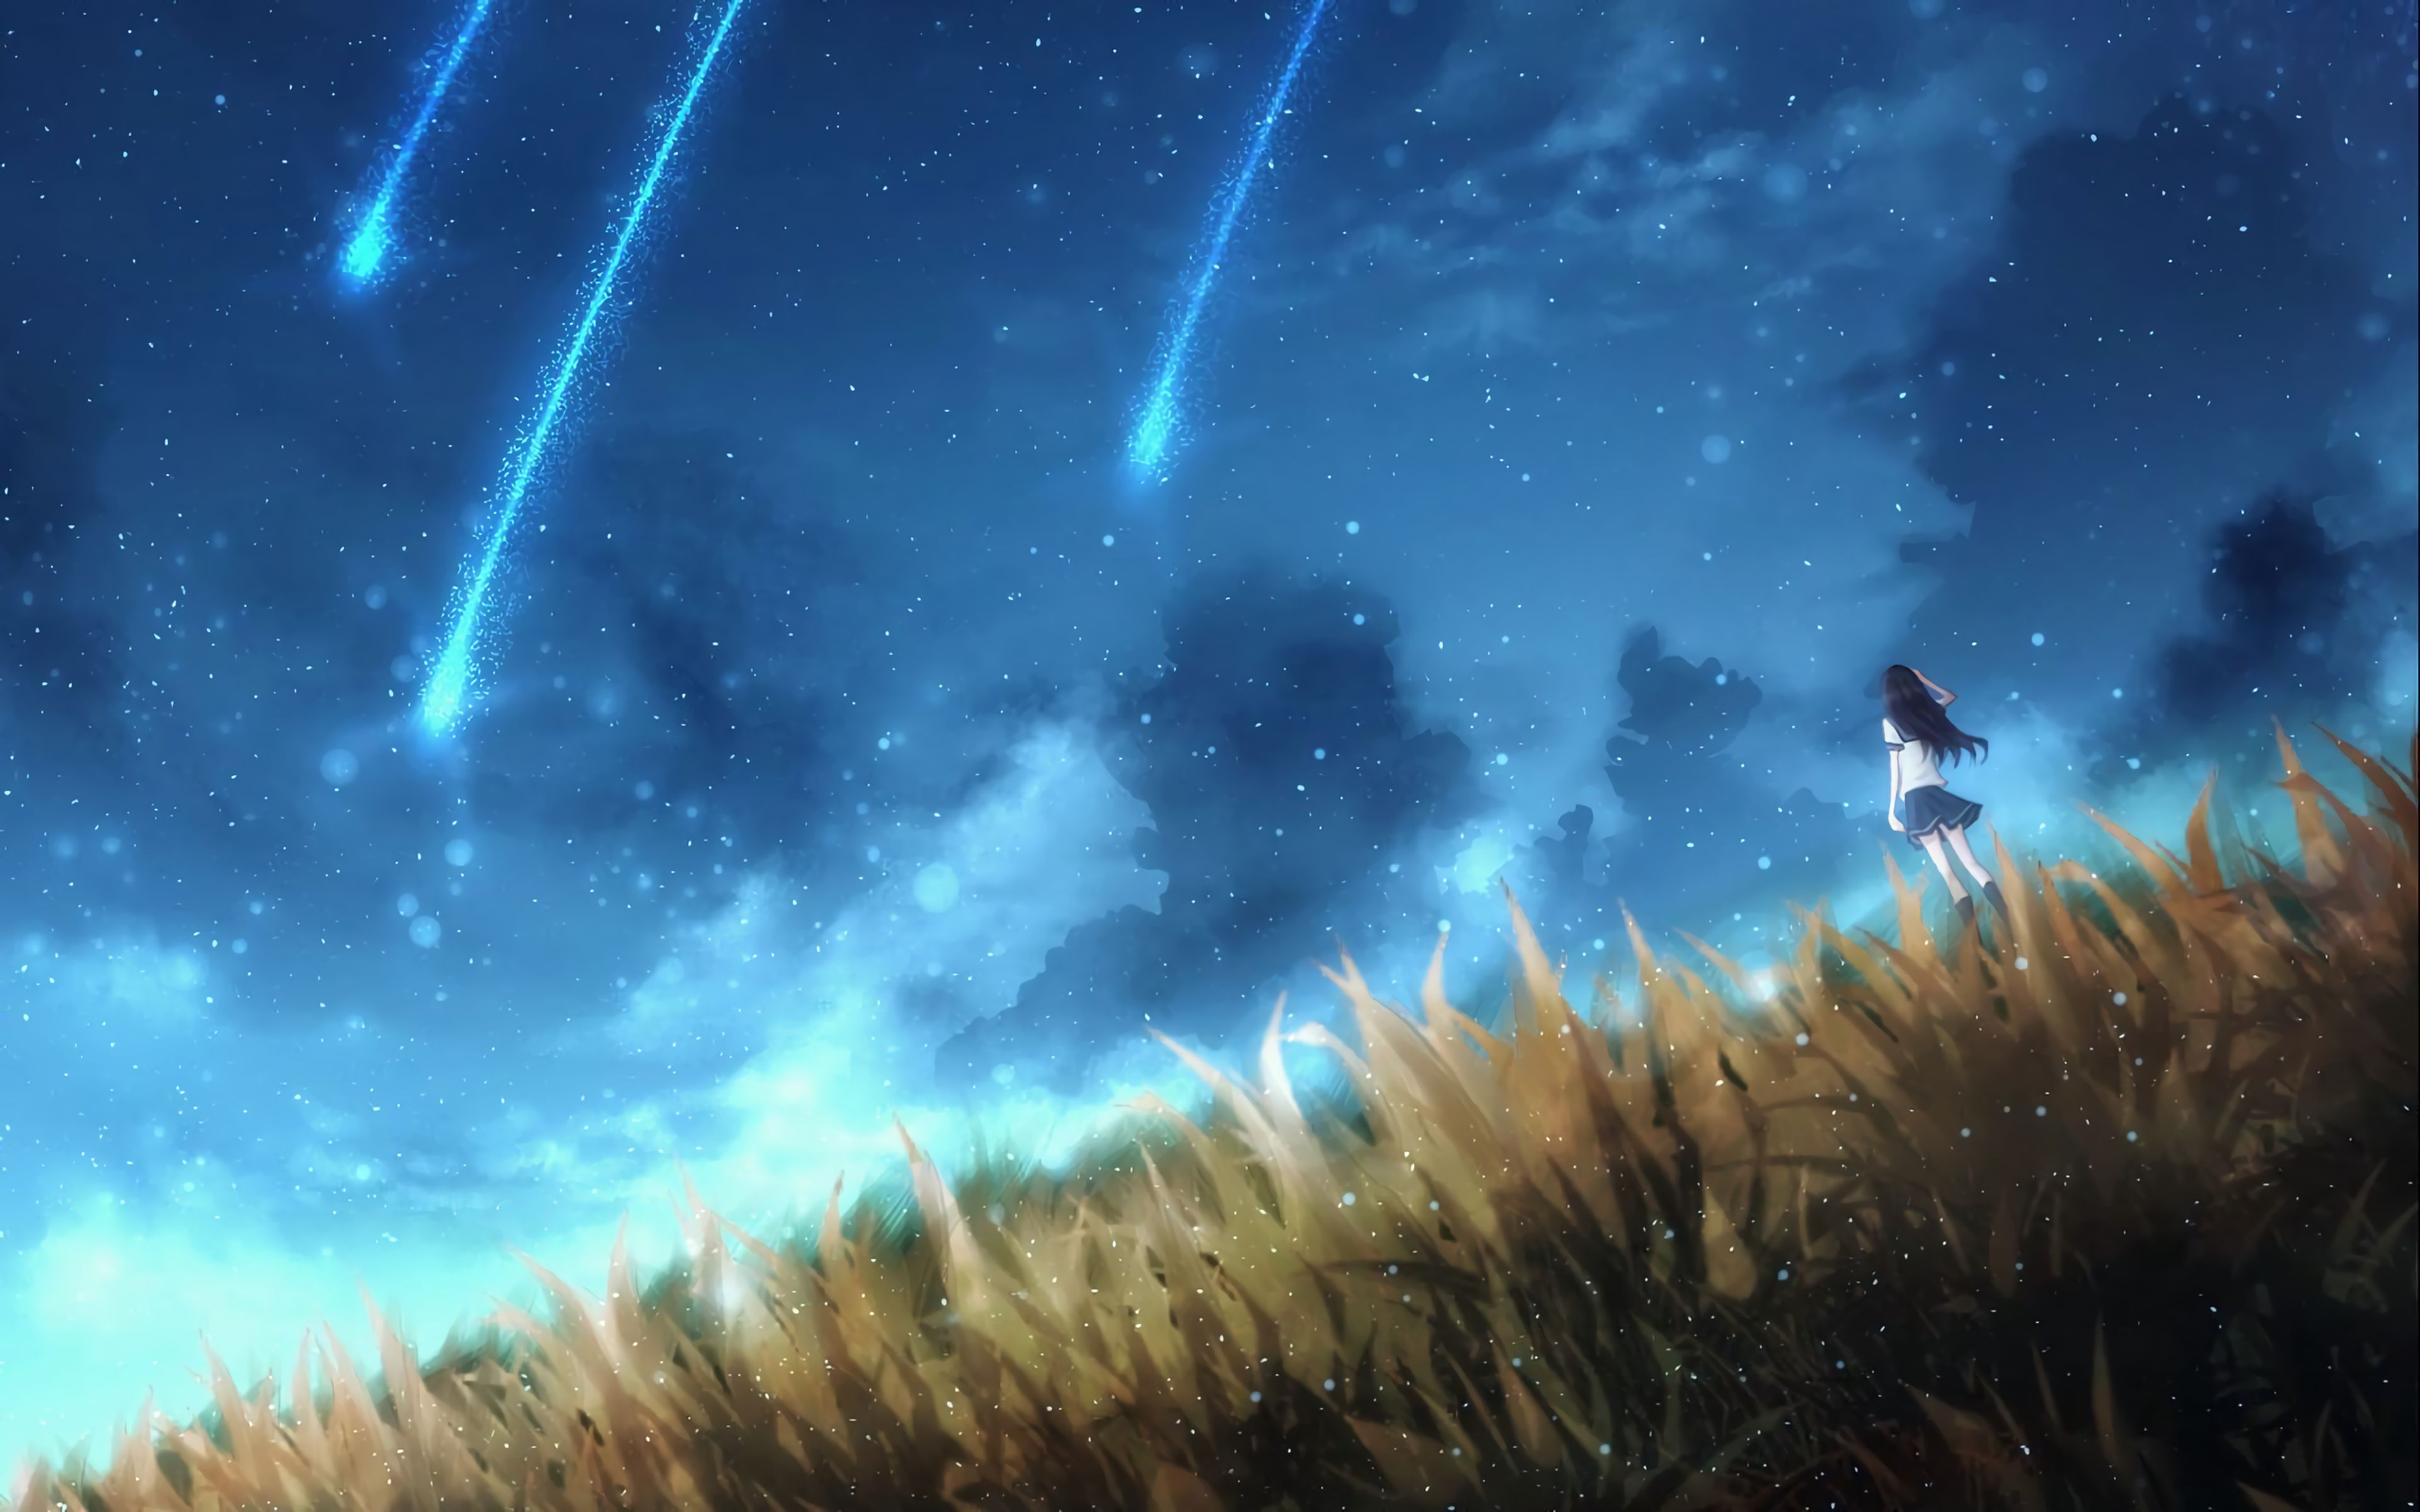 Anime Anime Girls Anime Landscape Moescape Original Characters Alone Isolation Space Meteors Sky Clo 3840x2400